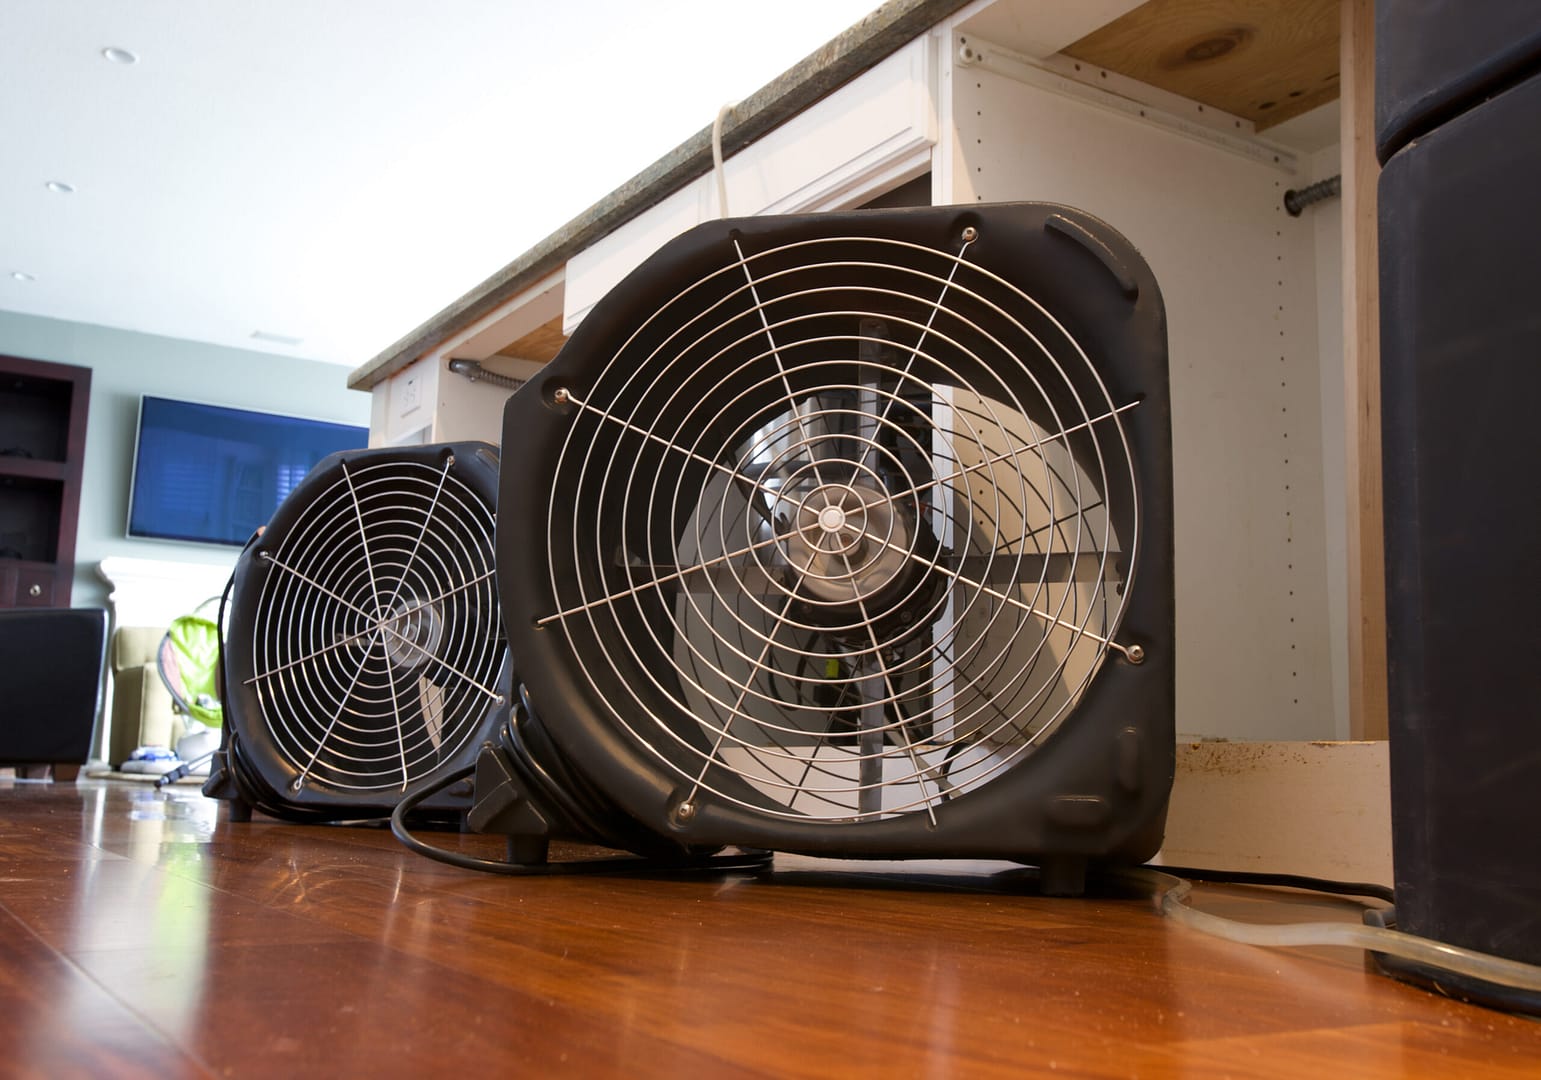 Industrial fans placed in a flooded kitchen, actively drying and ventilating the water-damaged area to prevent mold growth and promote quick recovery.